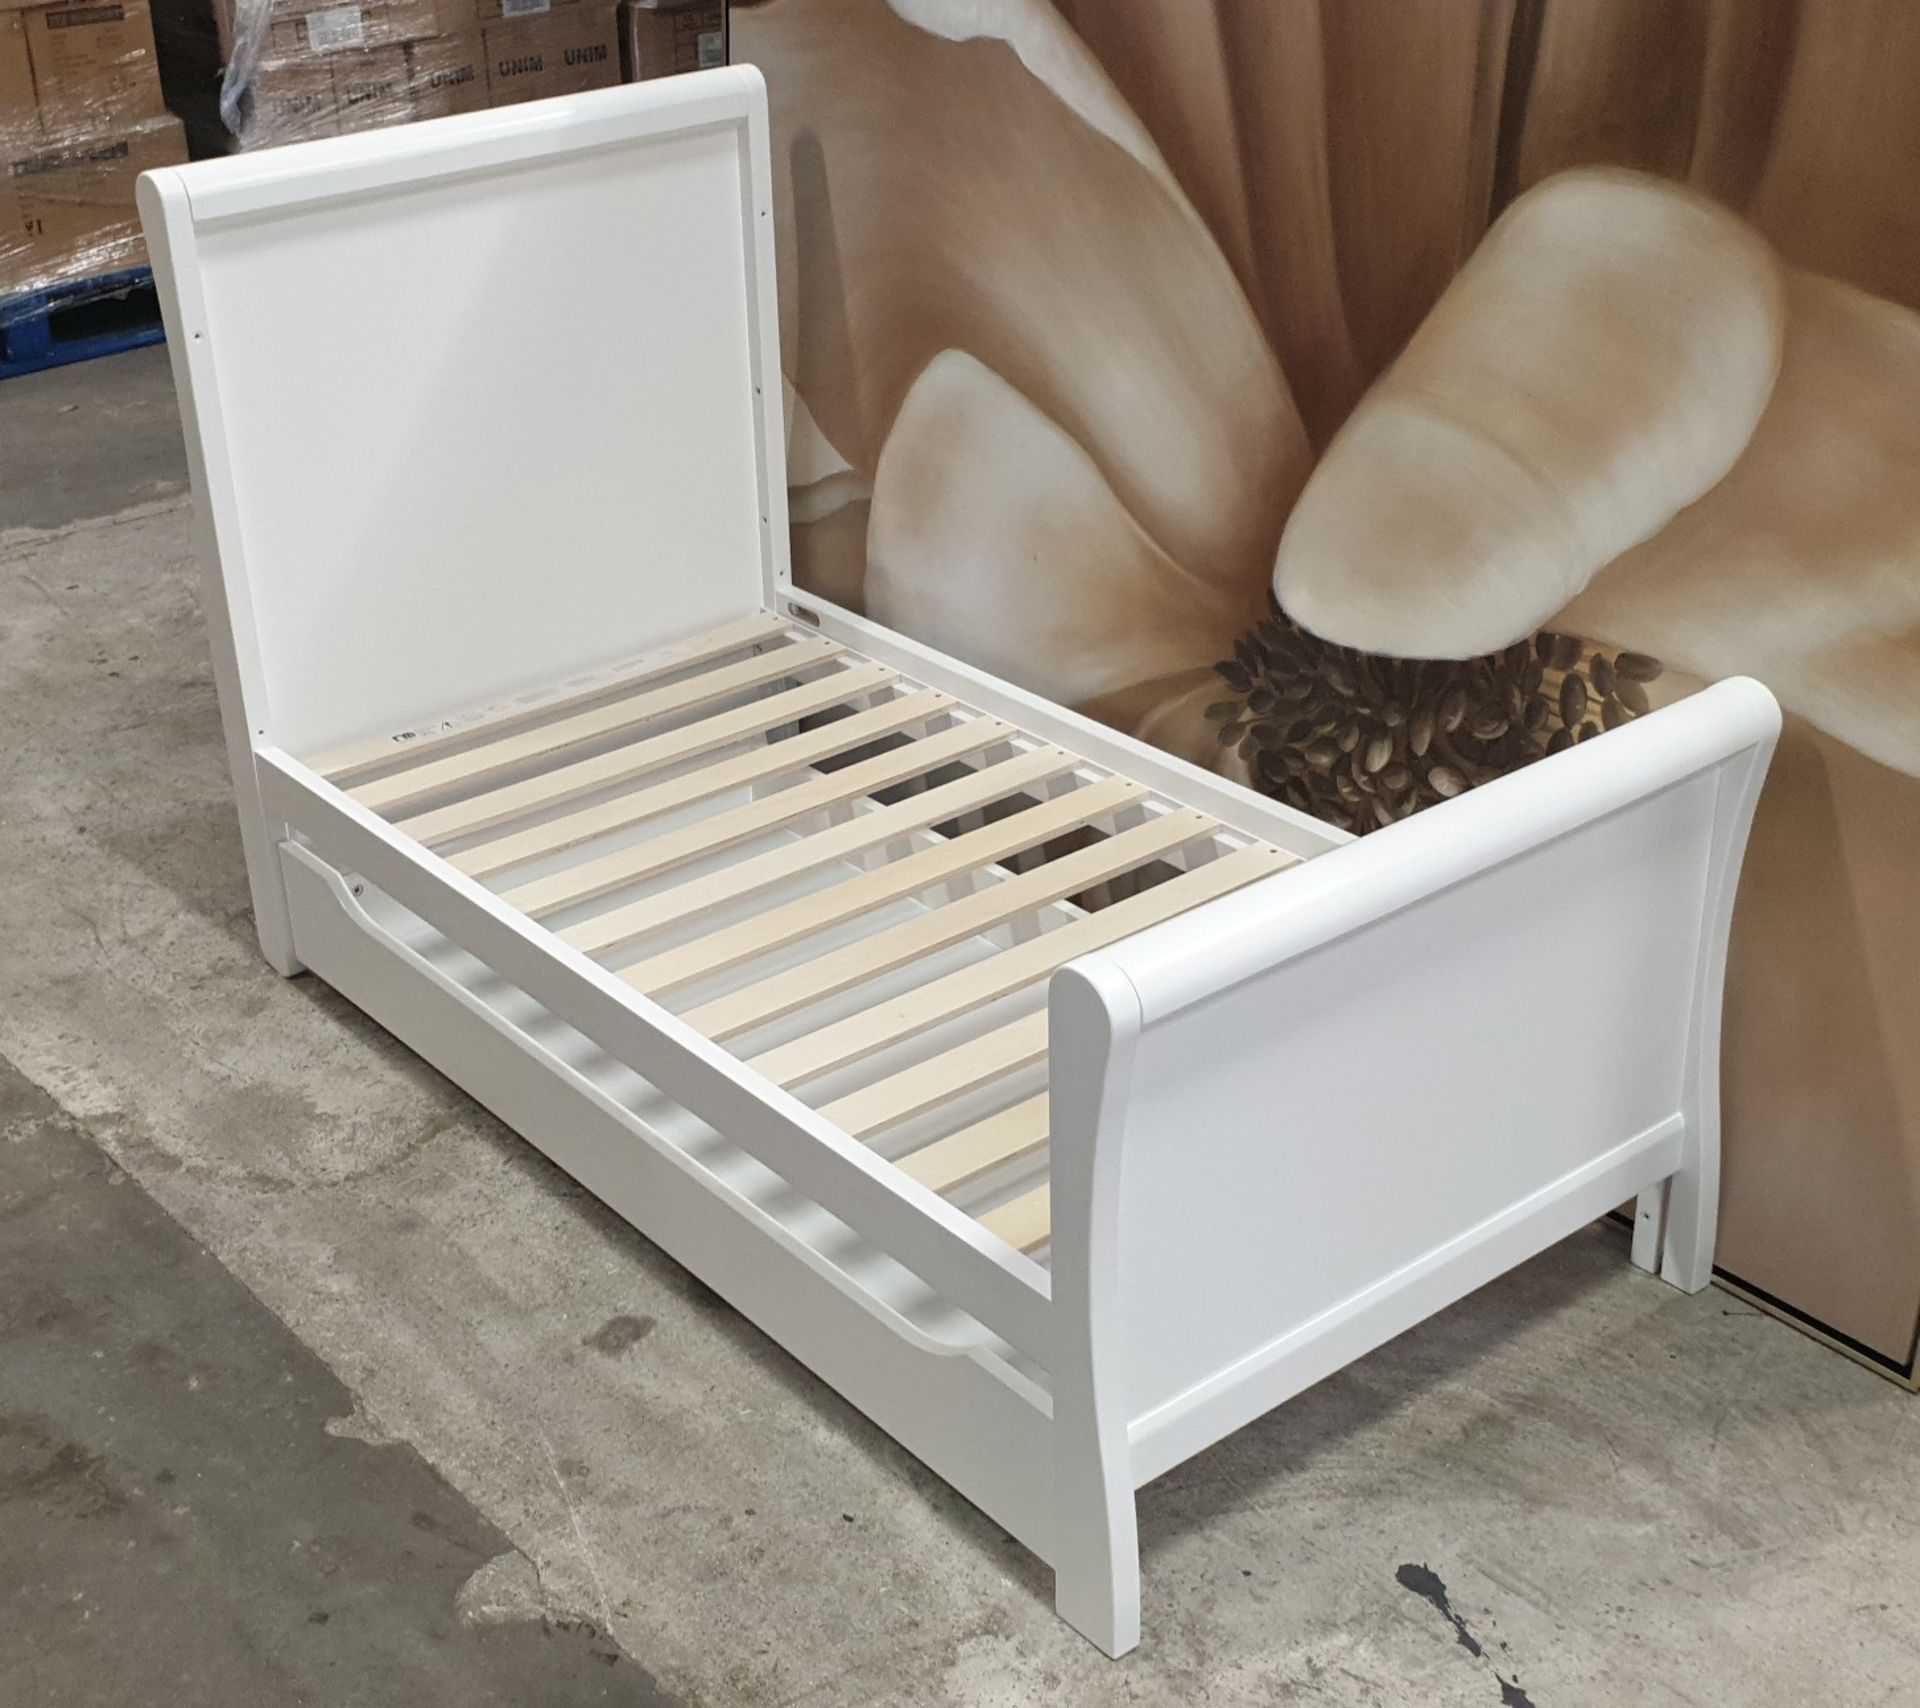 BRAND NEW MOTHERCARE HIGH GLOSS WHITE SLEIGH COT BED WITH STORAGE DRAWER - (KB488) - RRP £299 - IN 2 - Image 2 of 2